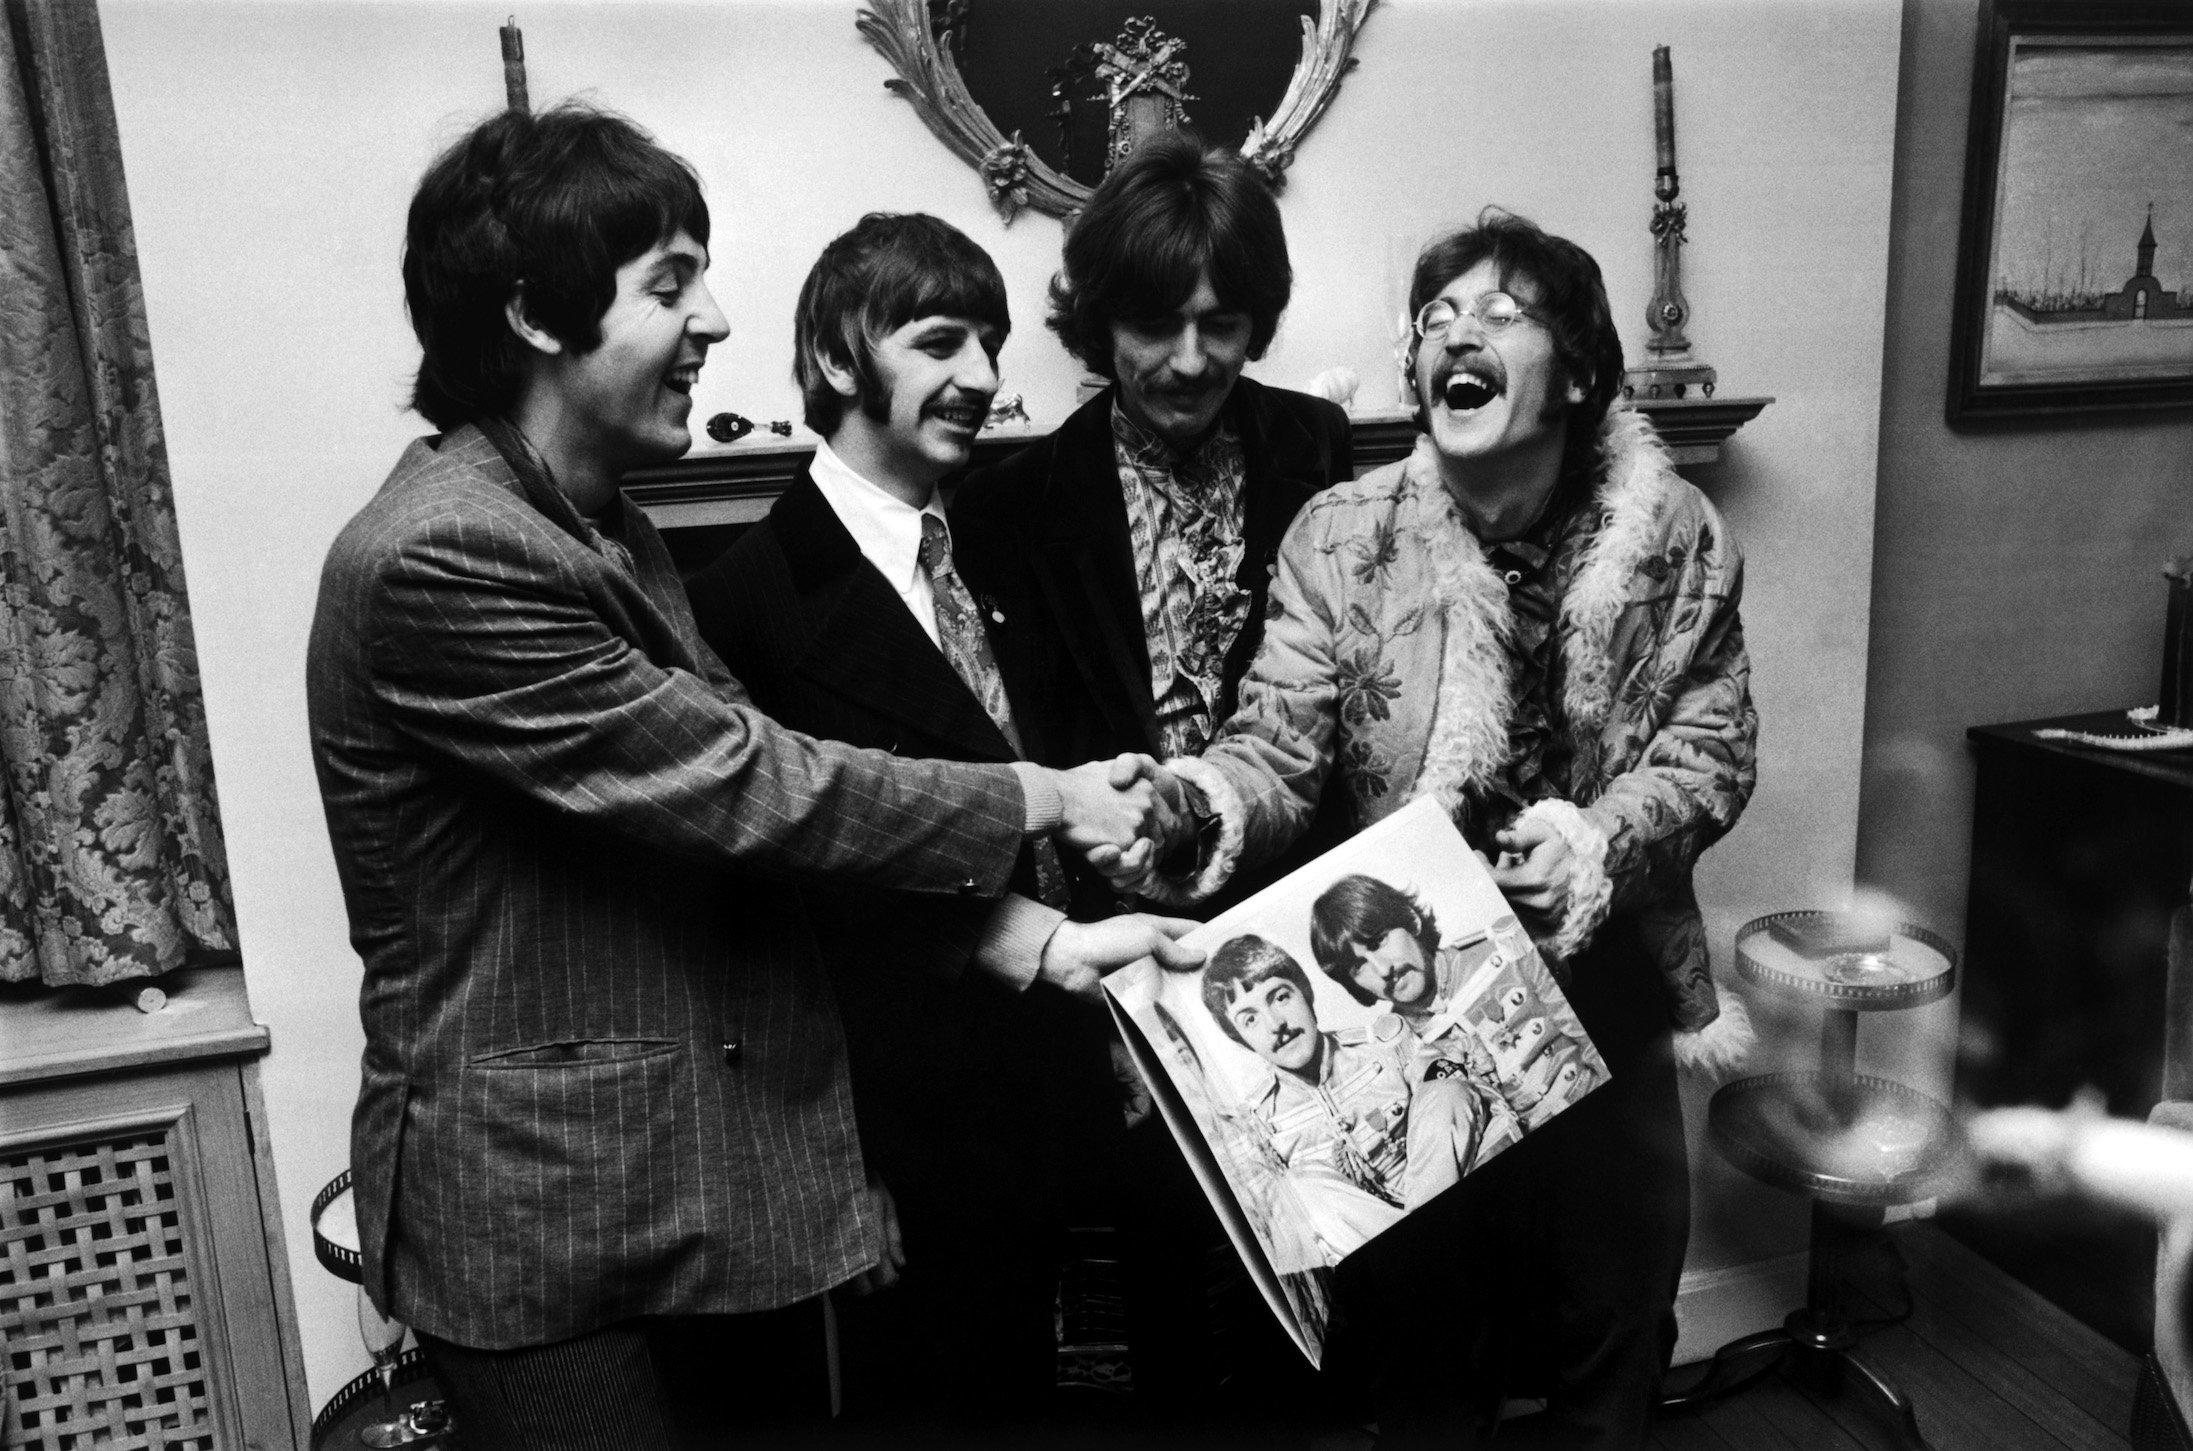 The Beatles attend the launch party for their album 'Sgt. Pepper's Lonely Hearts Club Band'